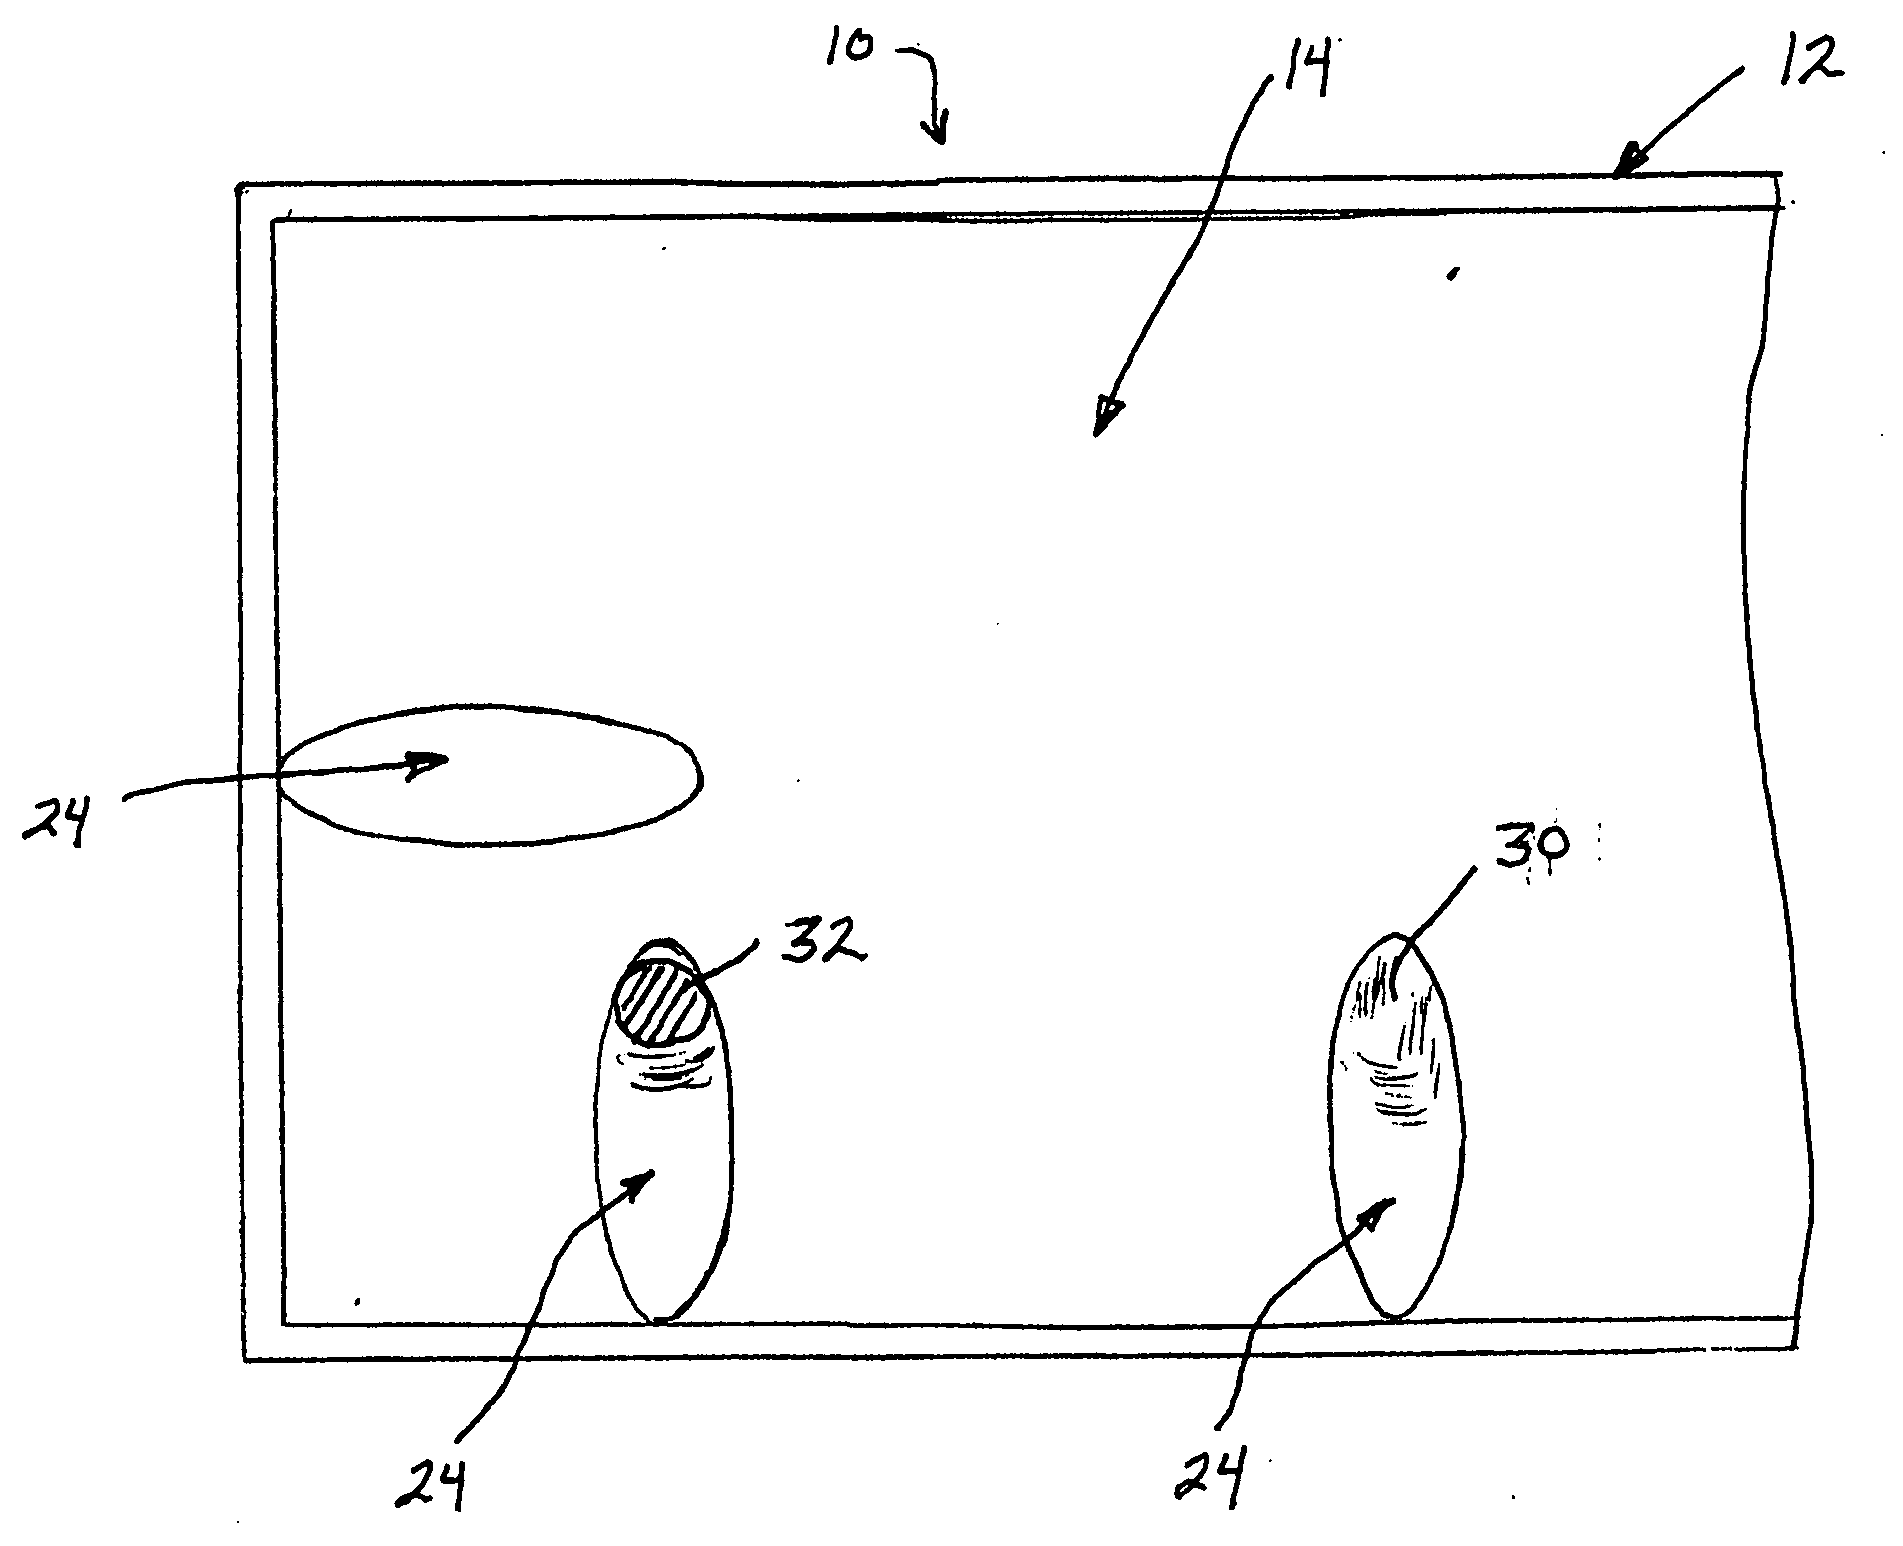 Message holding device for removably suspending one or more articles therefrom